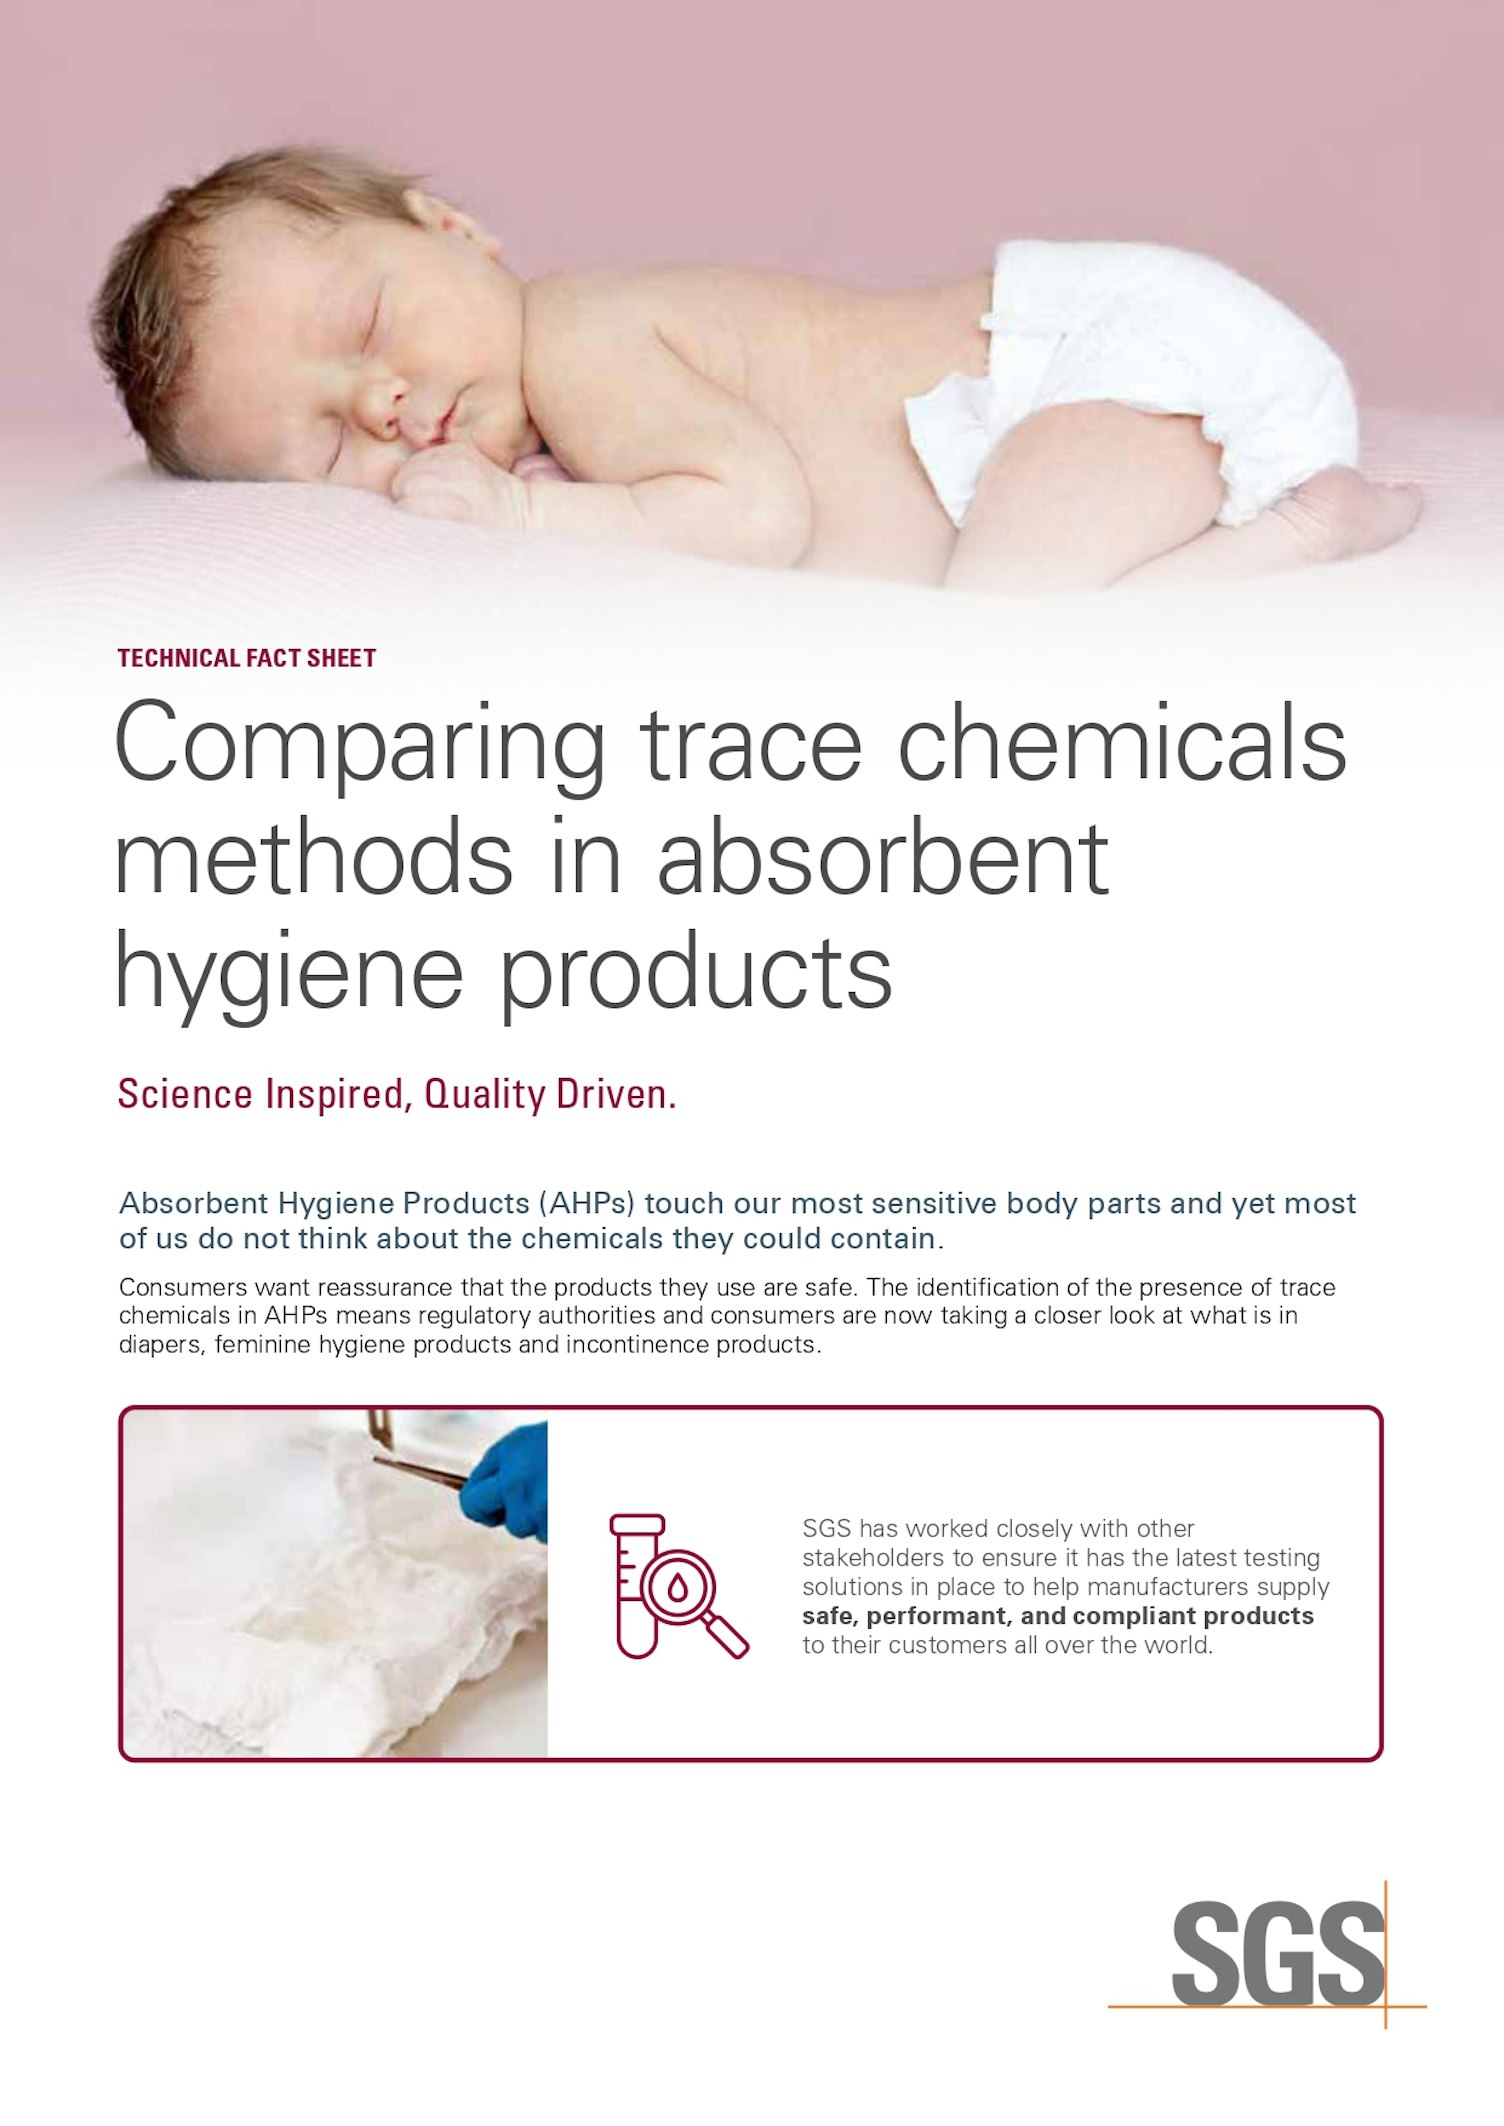 Comparing Trace Chemicals Methods in Absorbent Hygiene Products